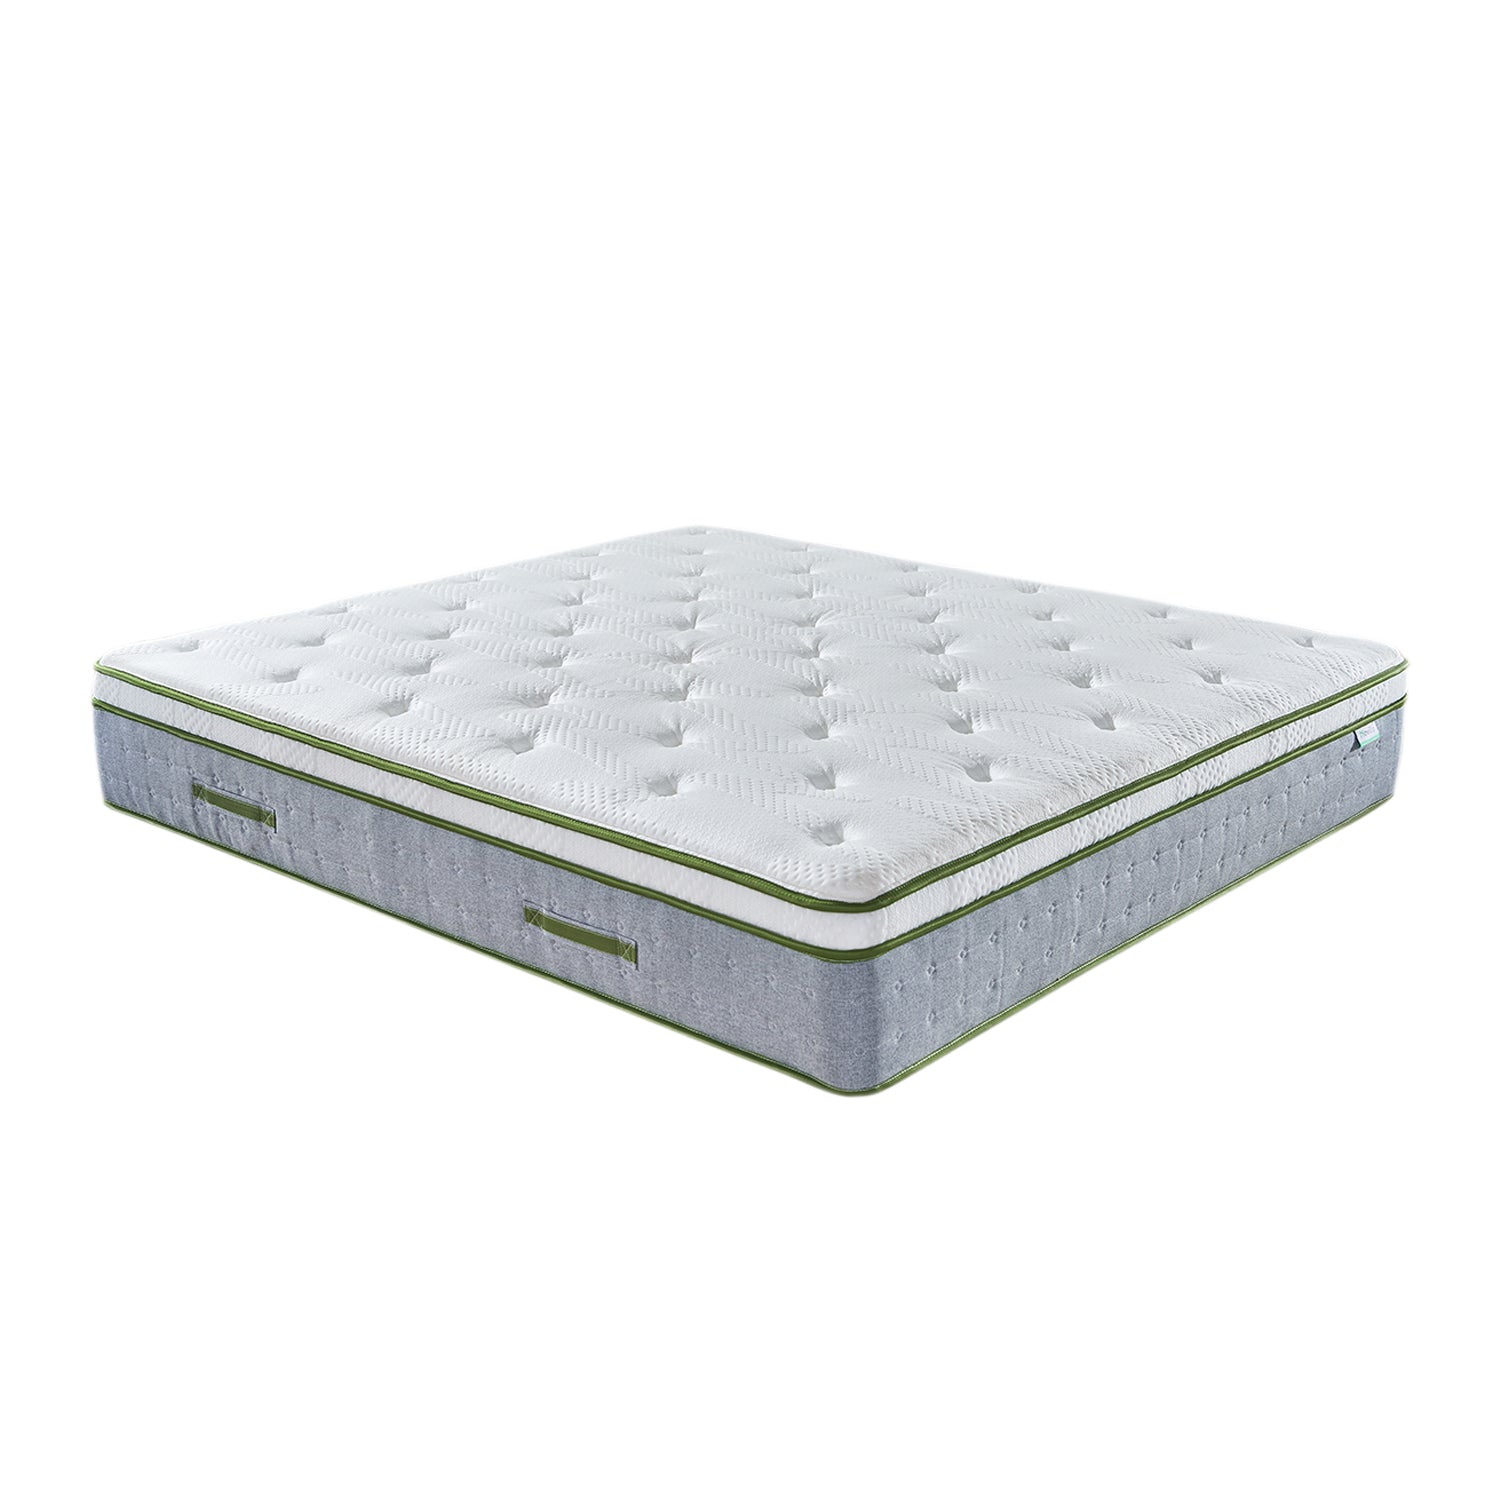 • The most supportive mattress for proper spinal alignment • Gel-infused foam layer and pocket coils ensuring optimal cooling feel • Designed for most sleepers to alleviate back pain • Sturdy edge support and great motion isolation for couples